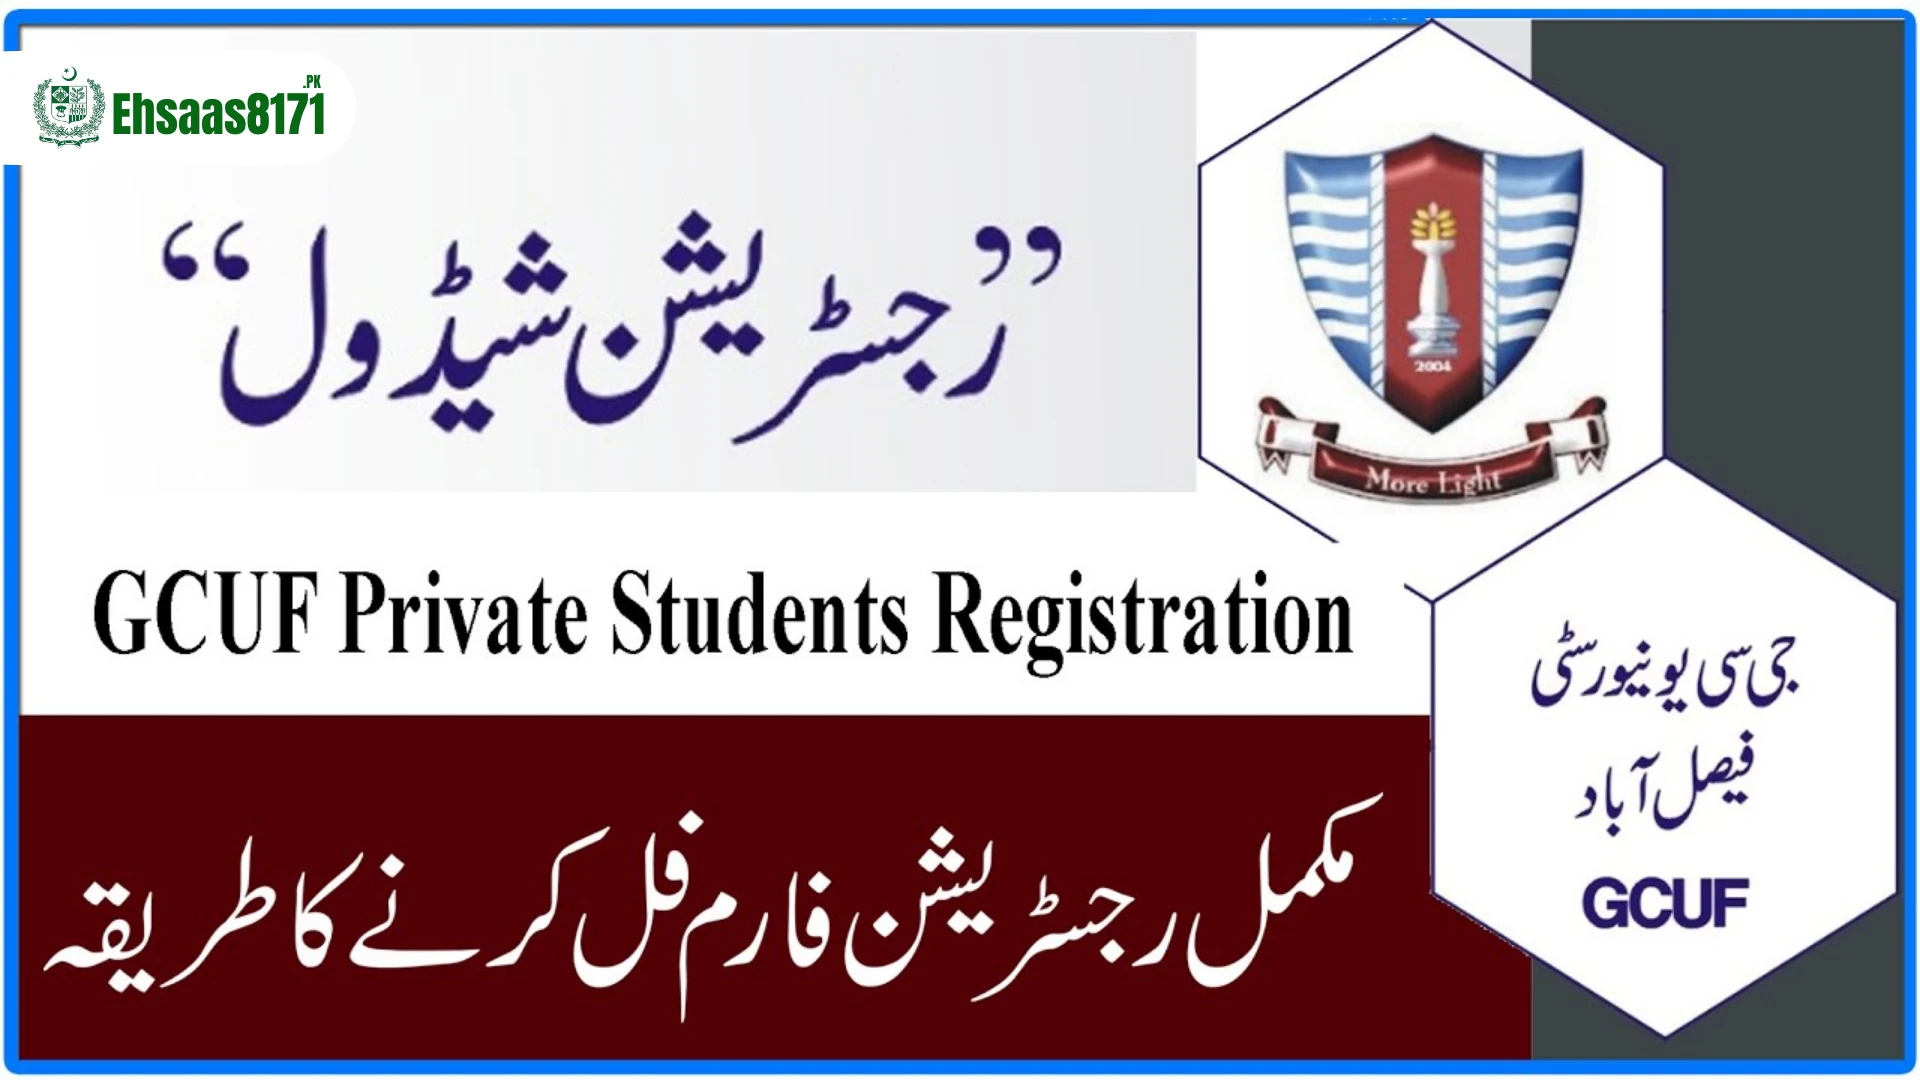 Registration of Private Students of GCUF